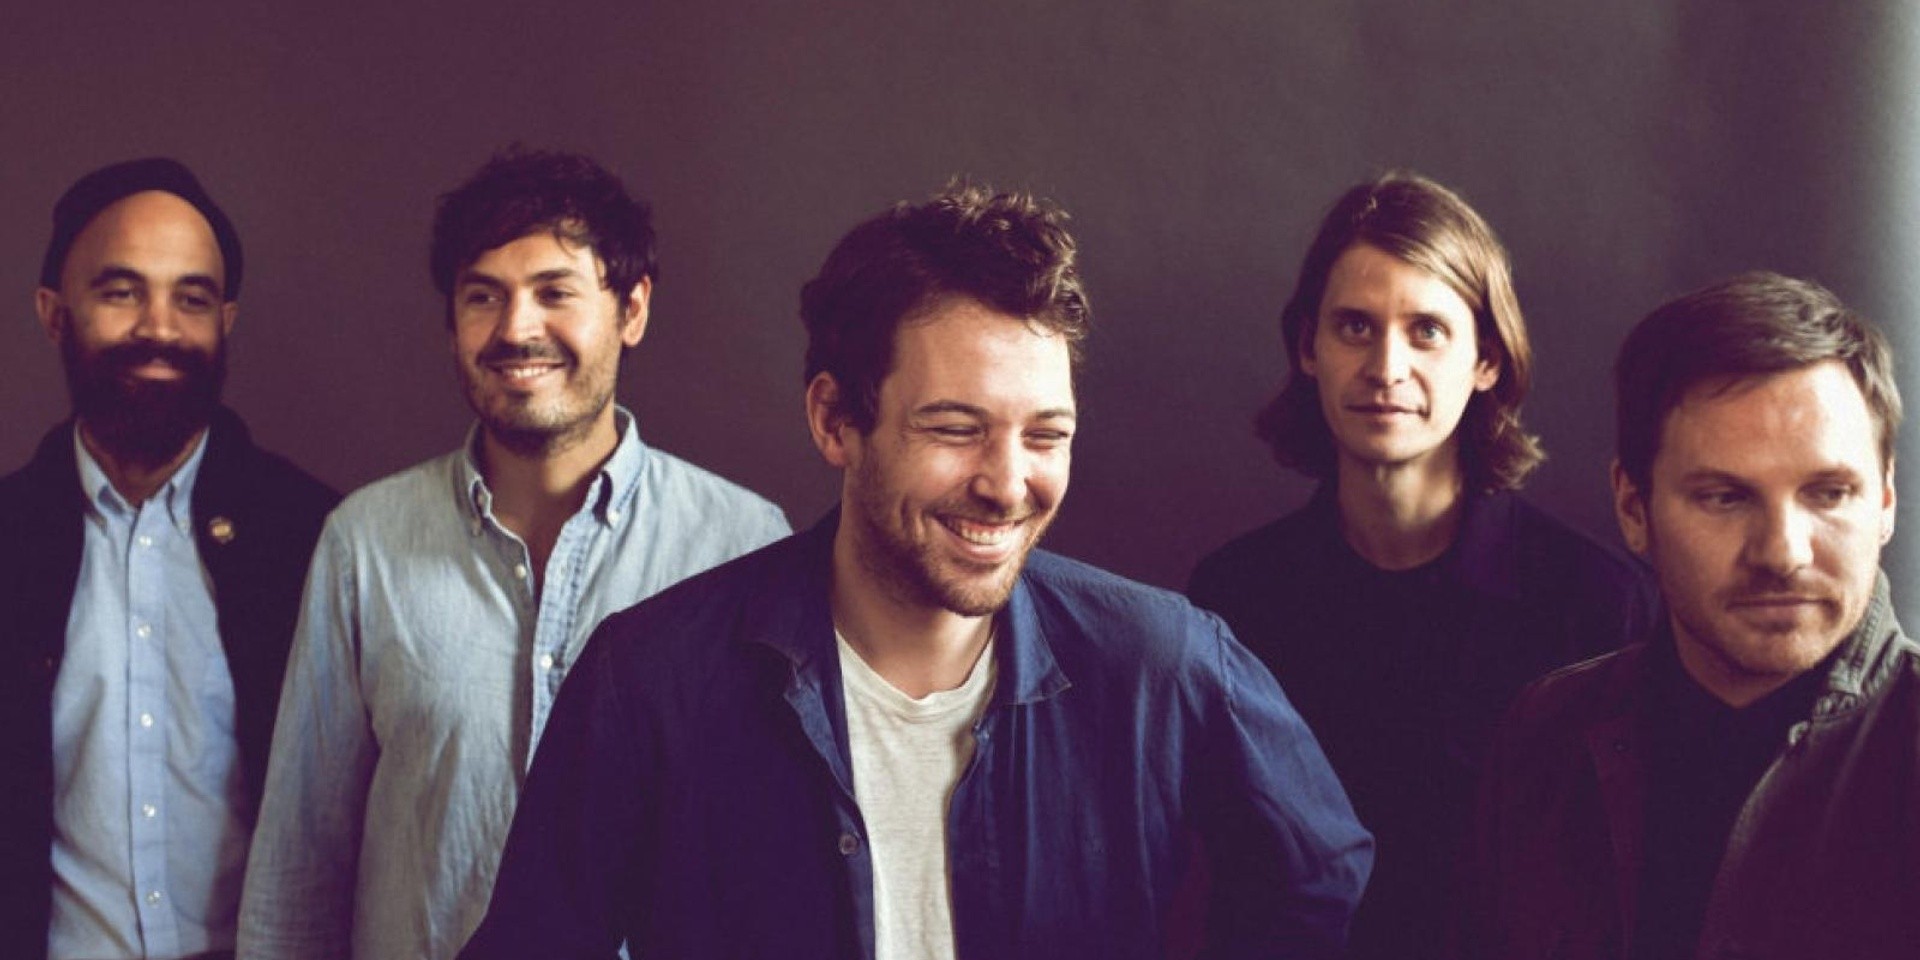 Fleet Foxes' Robin Pecknold: "I’m prouder of this record than of the previous ones we’ve done"